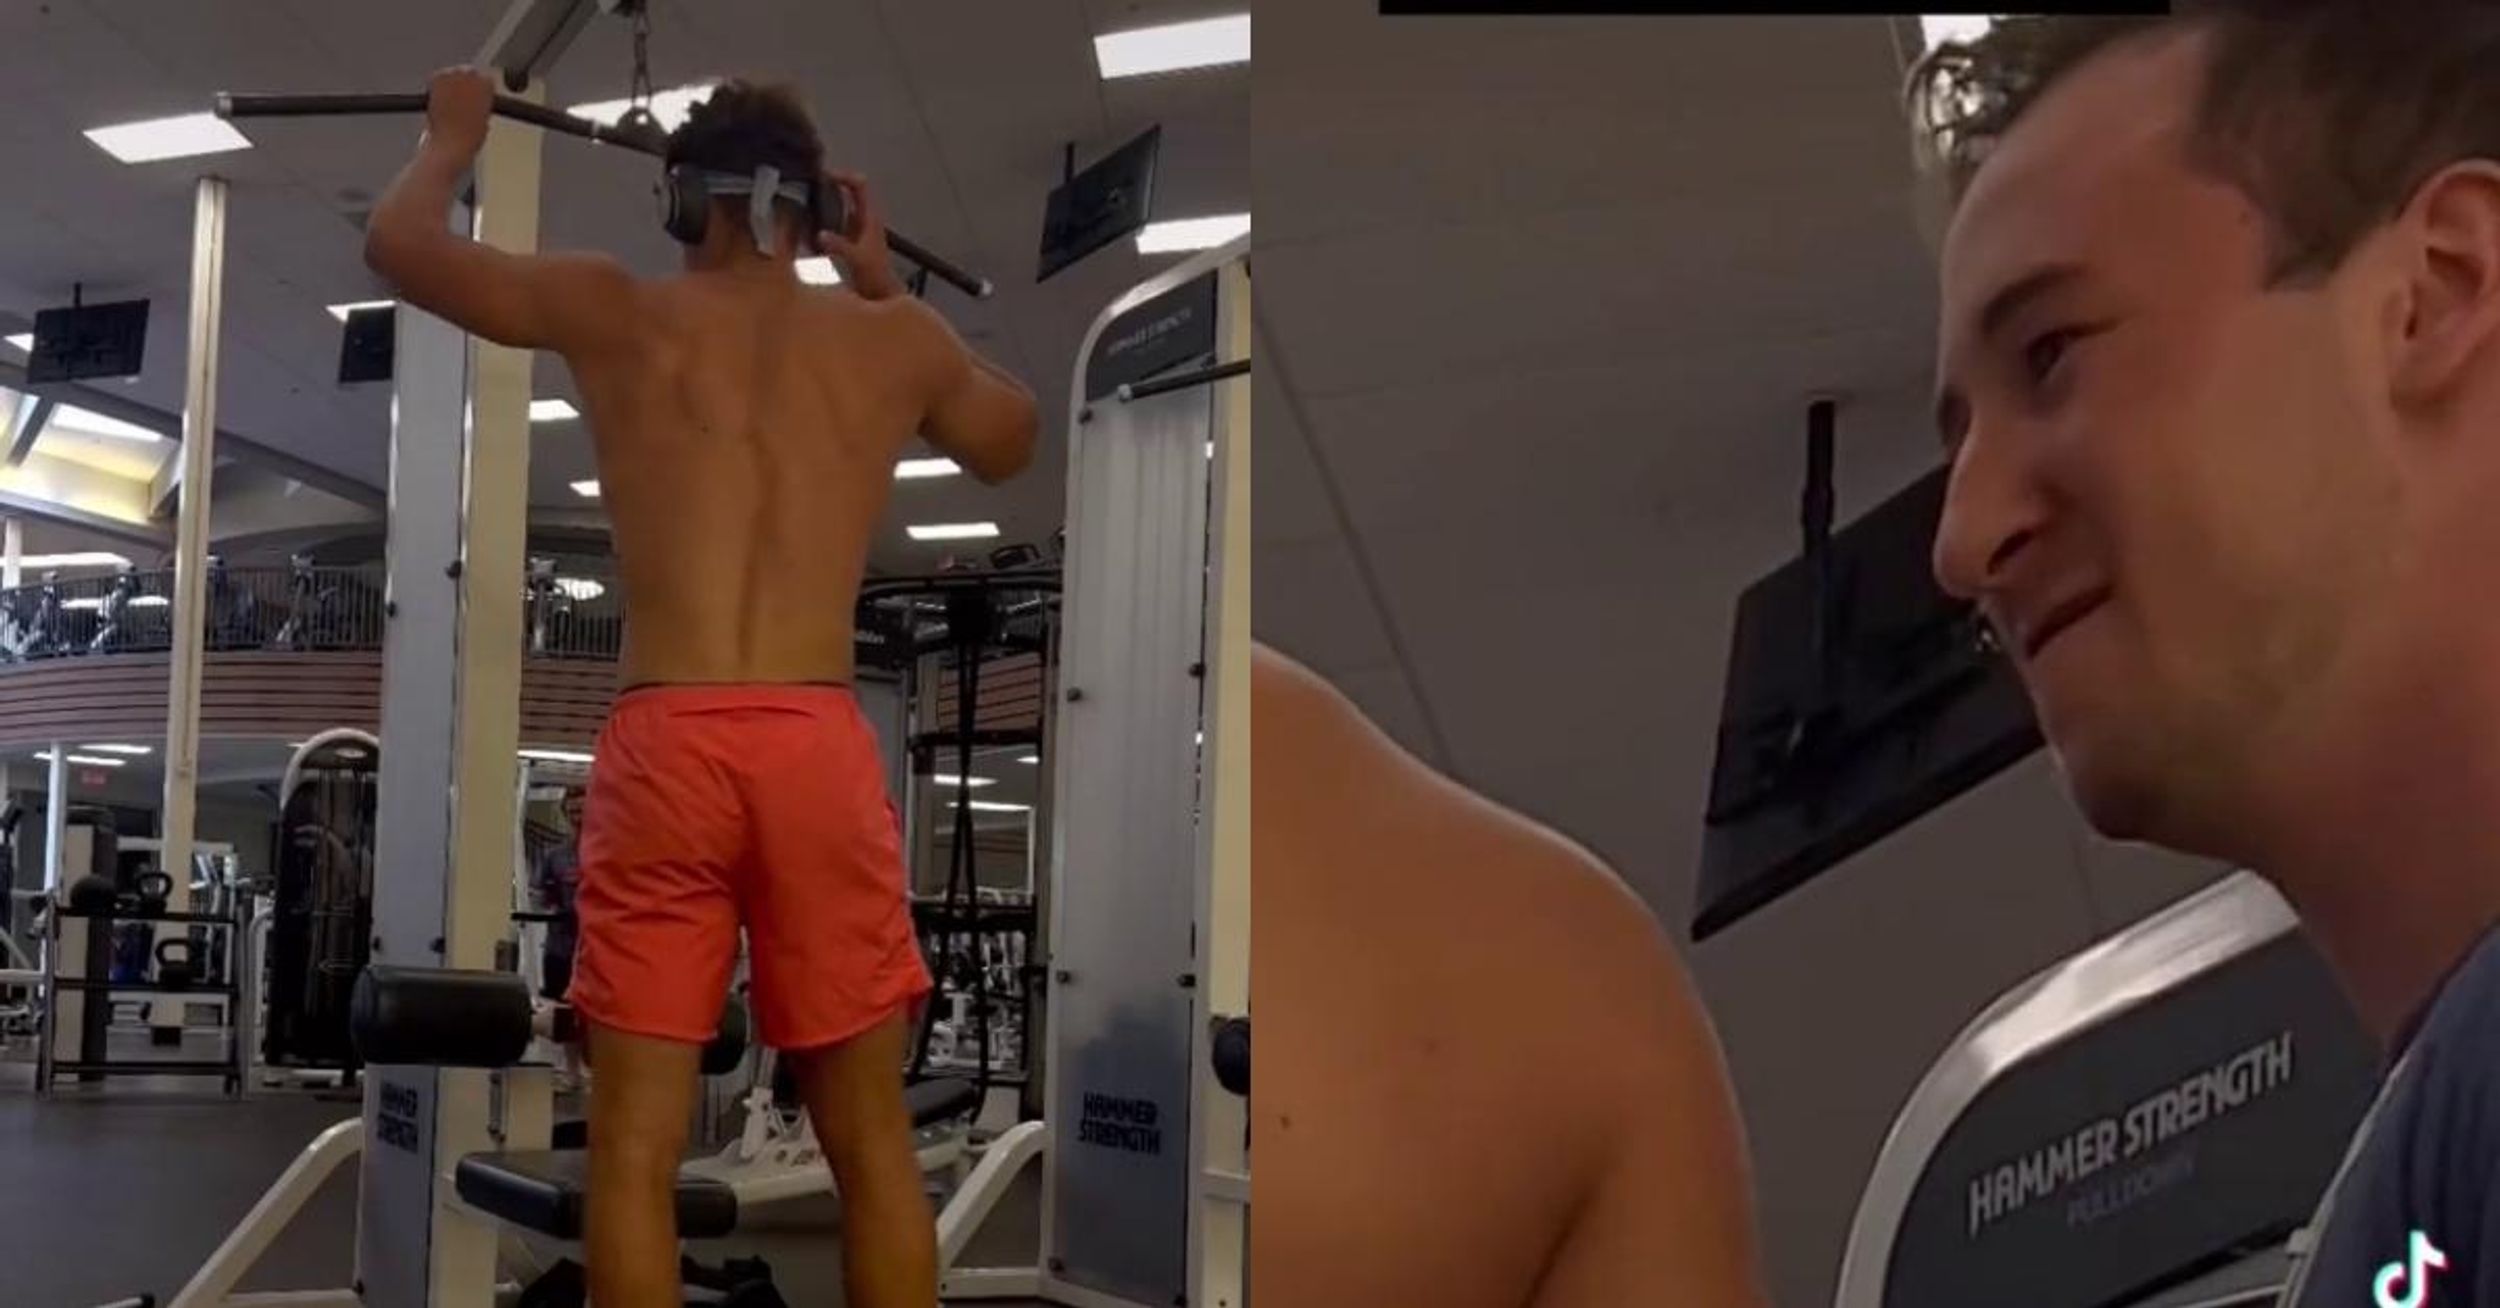 TikToker Gets Recorded And Called Homophobic Slur By Fellow Gymgoer For Working Out Shirtless